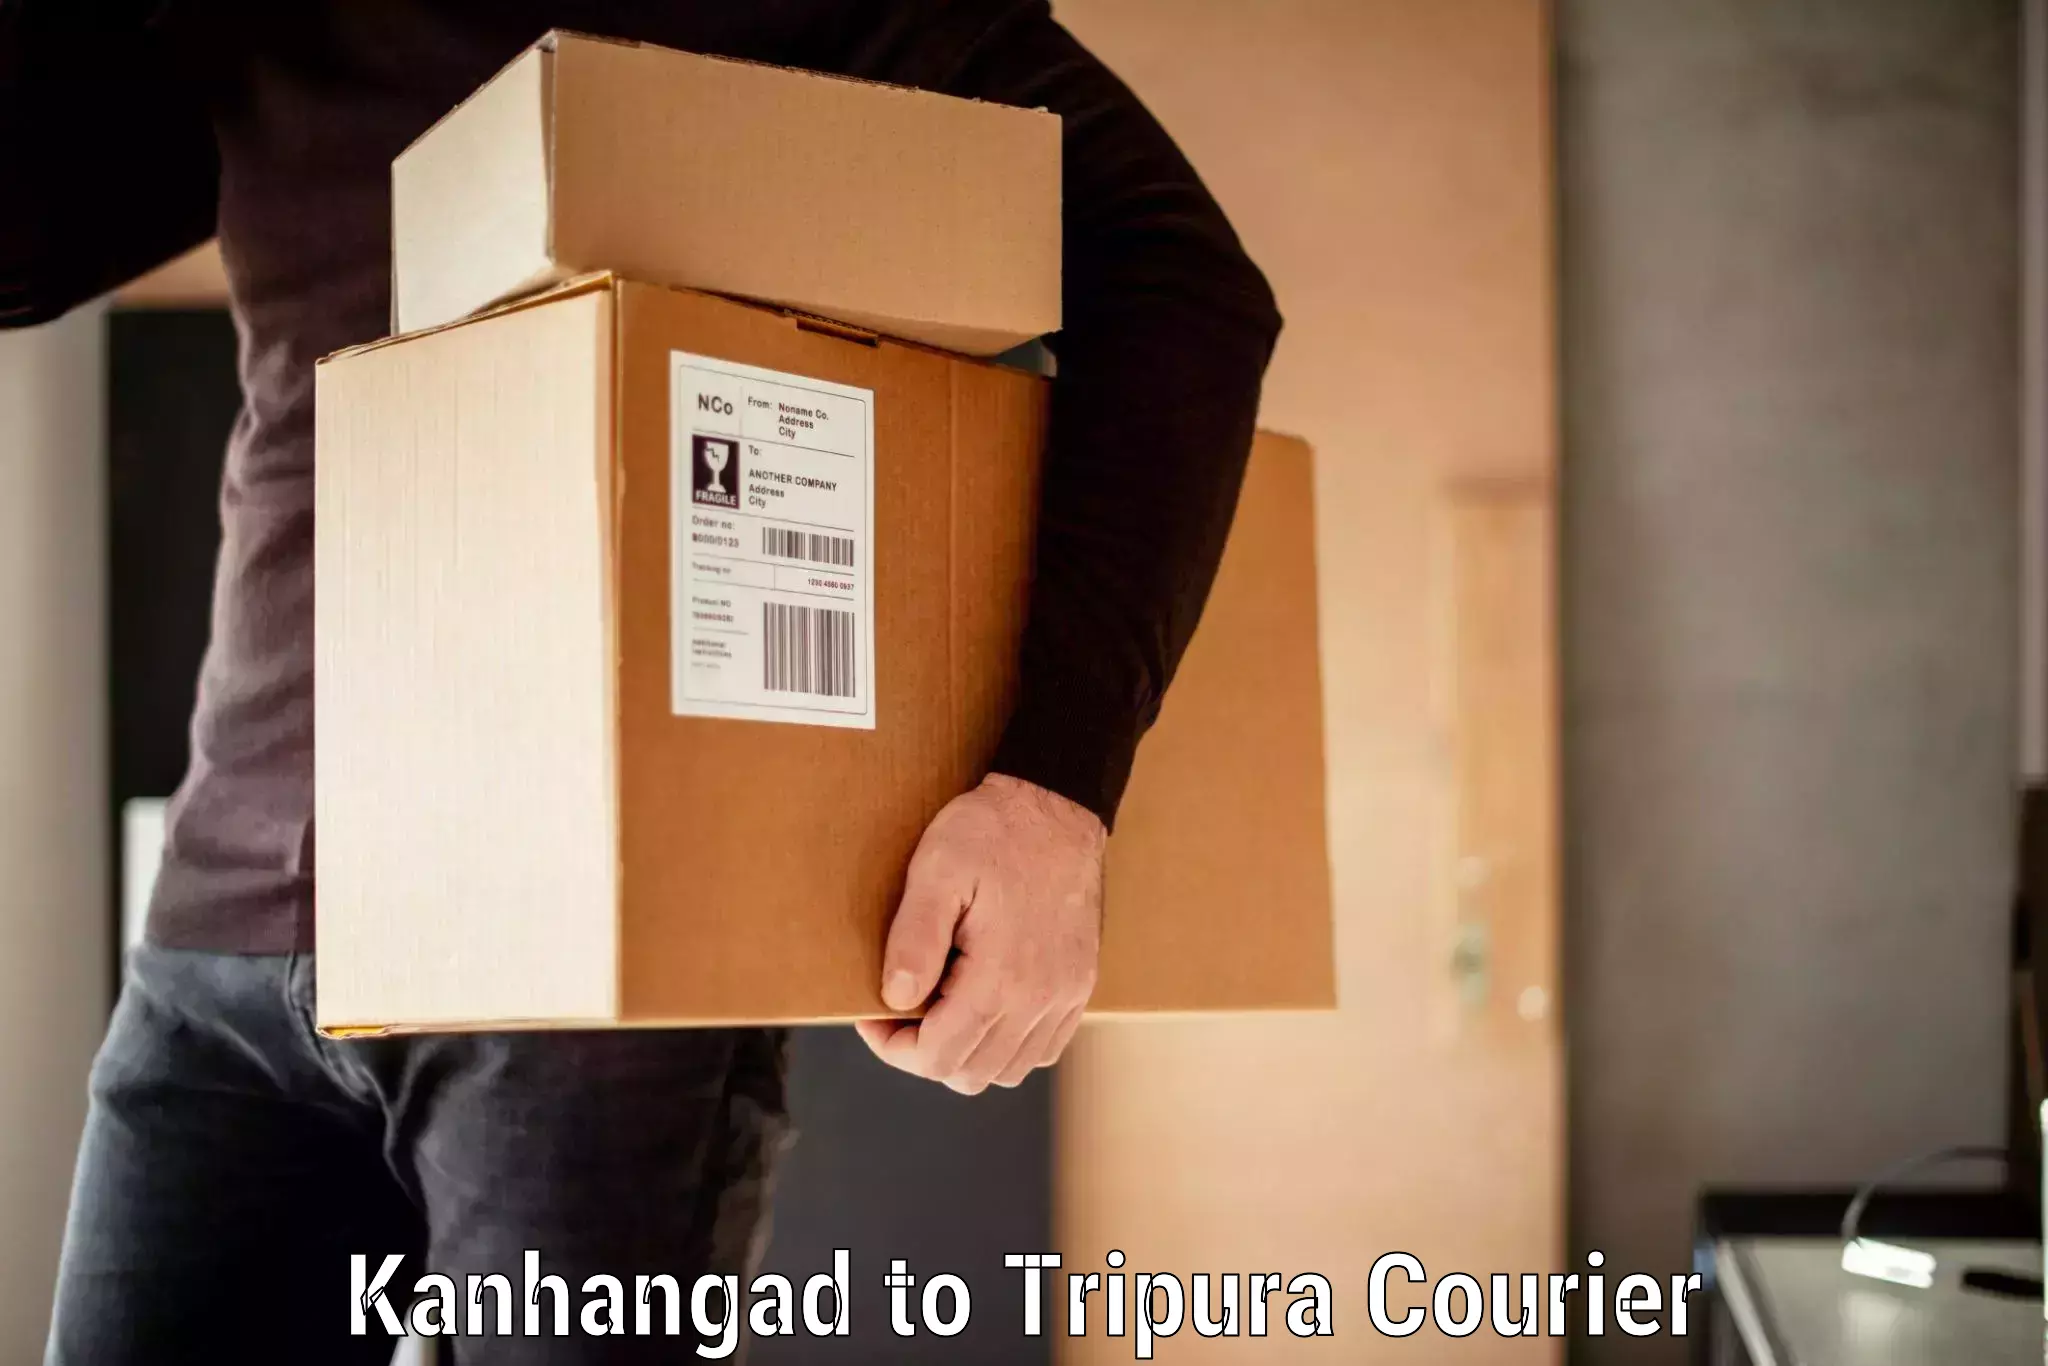 Luggage delivery network Kanhangad to Tripura